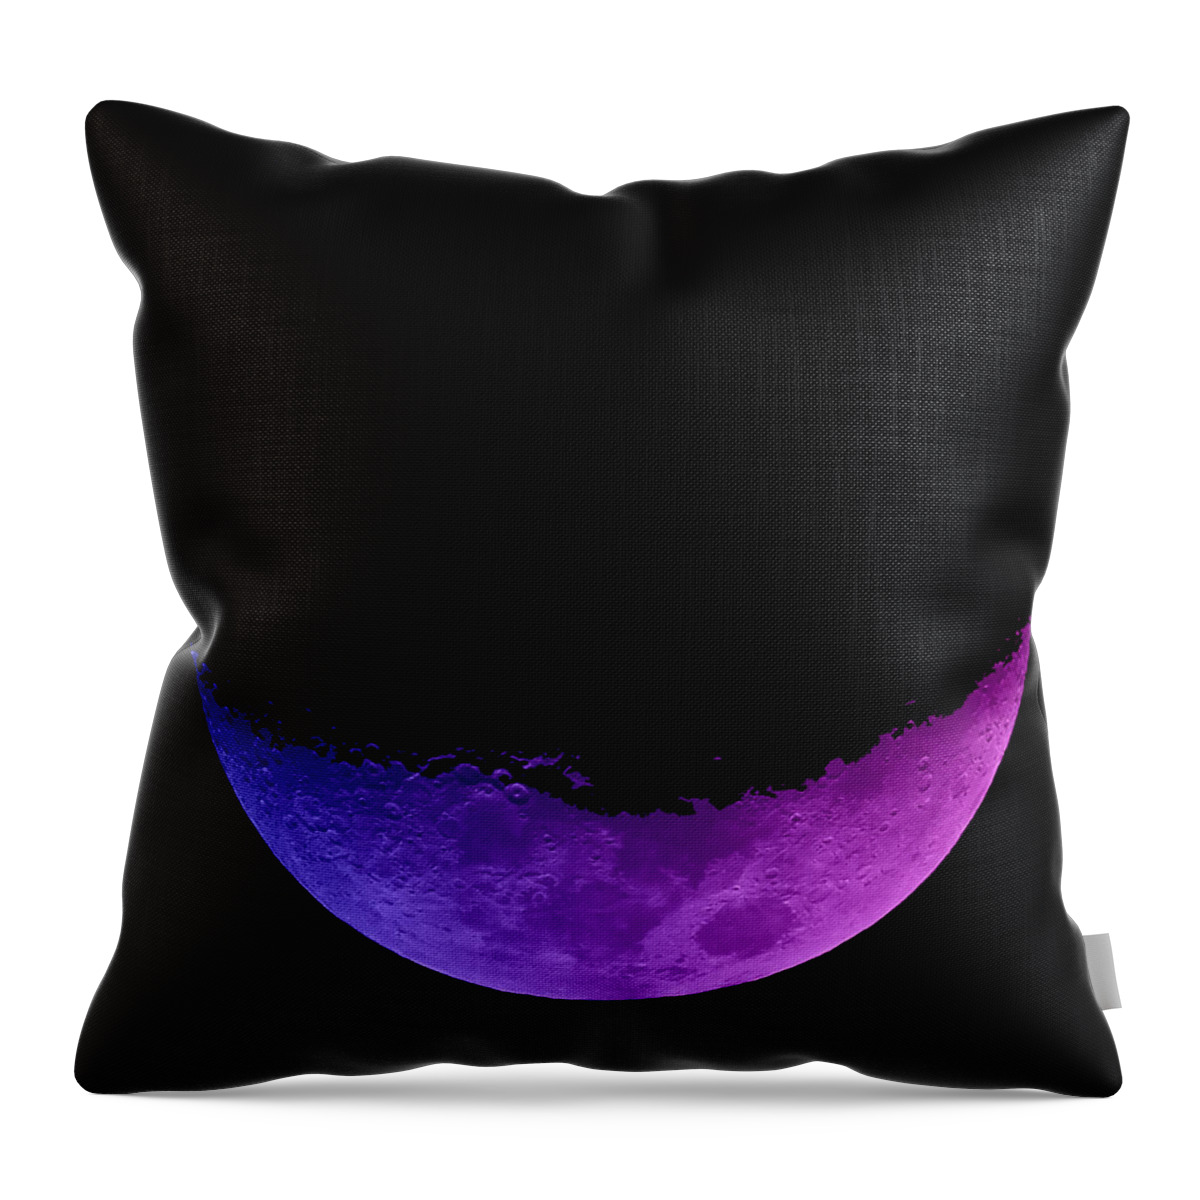 Moon Throw Pillow featuring the photograph Smiling by Mark Blauhoefer